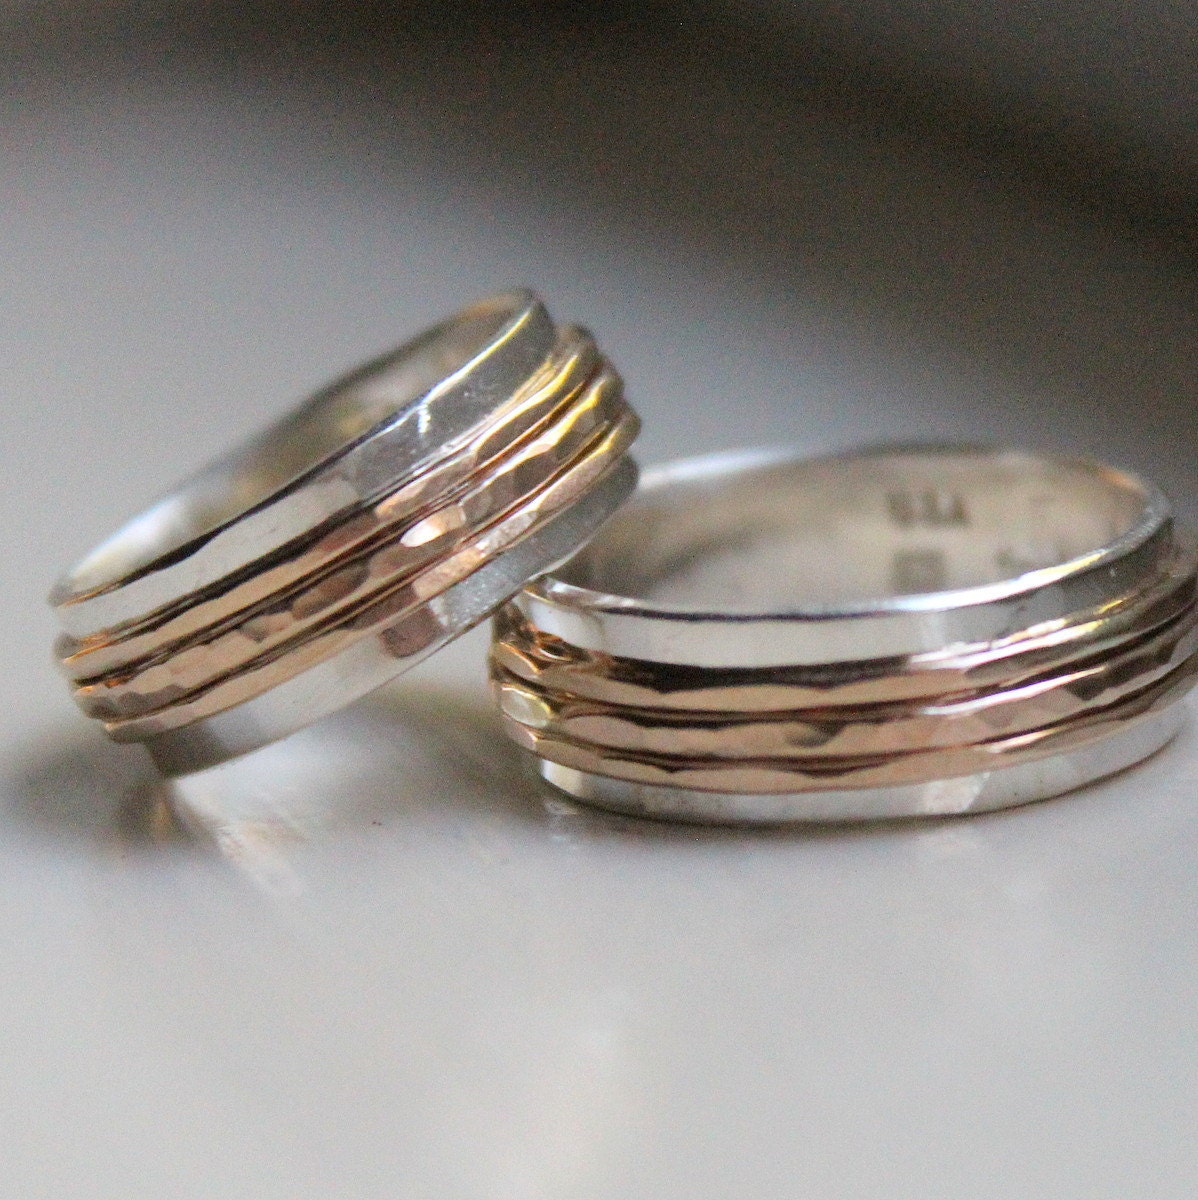 Rustic Wedding Ring Set - with RUSH PRODUCTION and EXPEDITED shipping